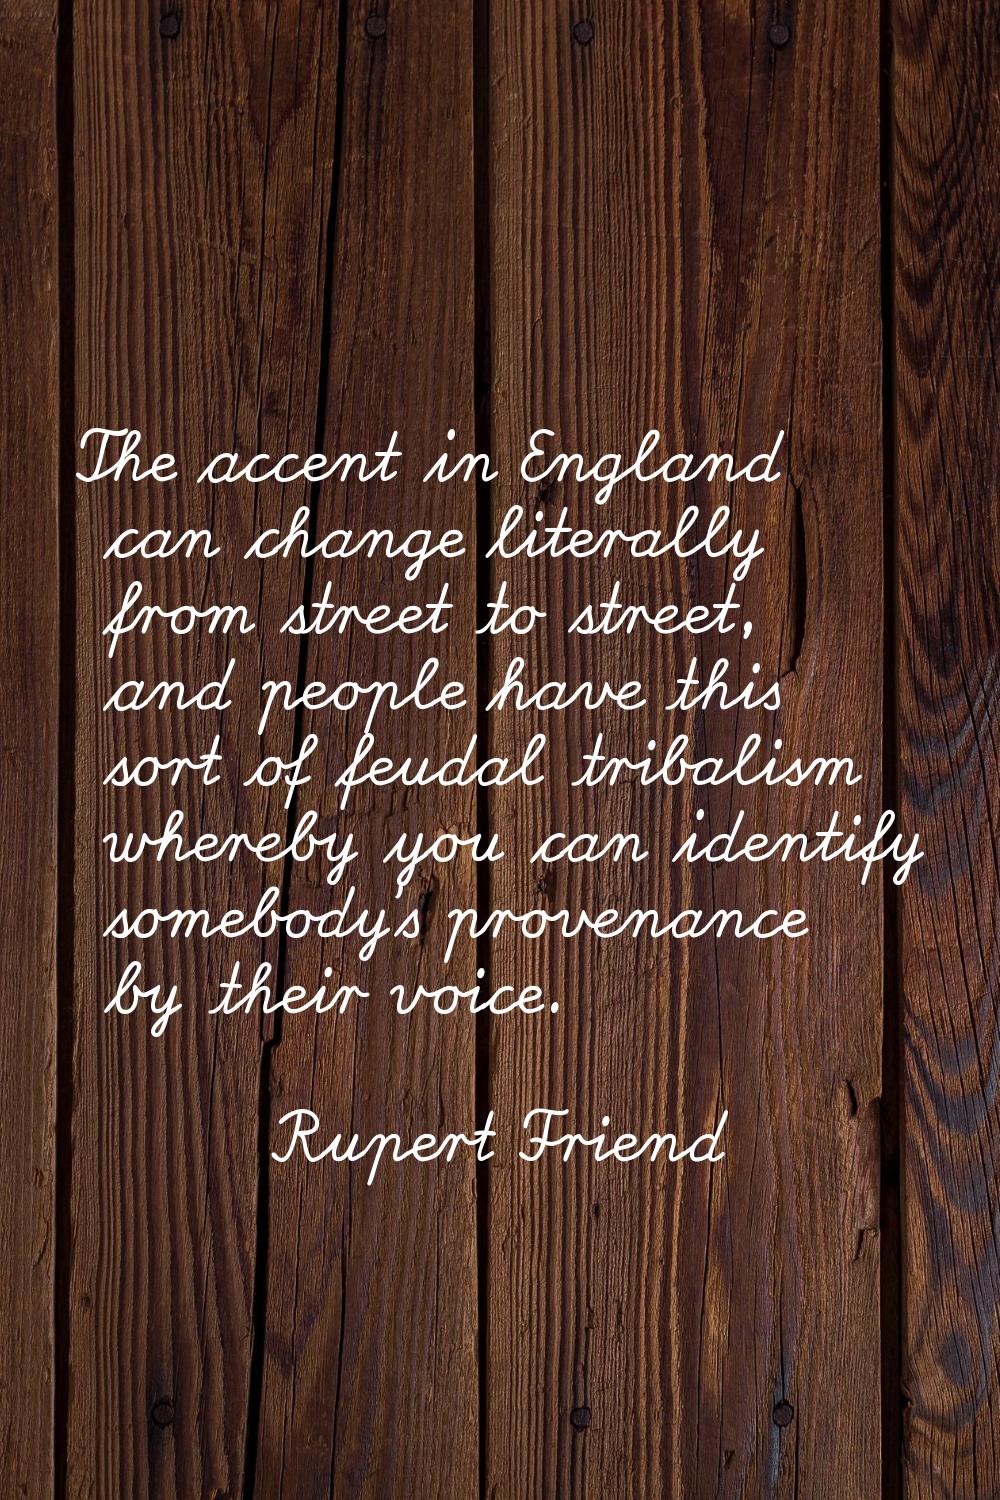 The accent in England can change literally from street to street, and people have this sort of feud